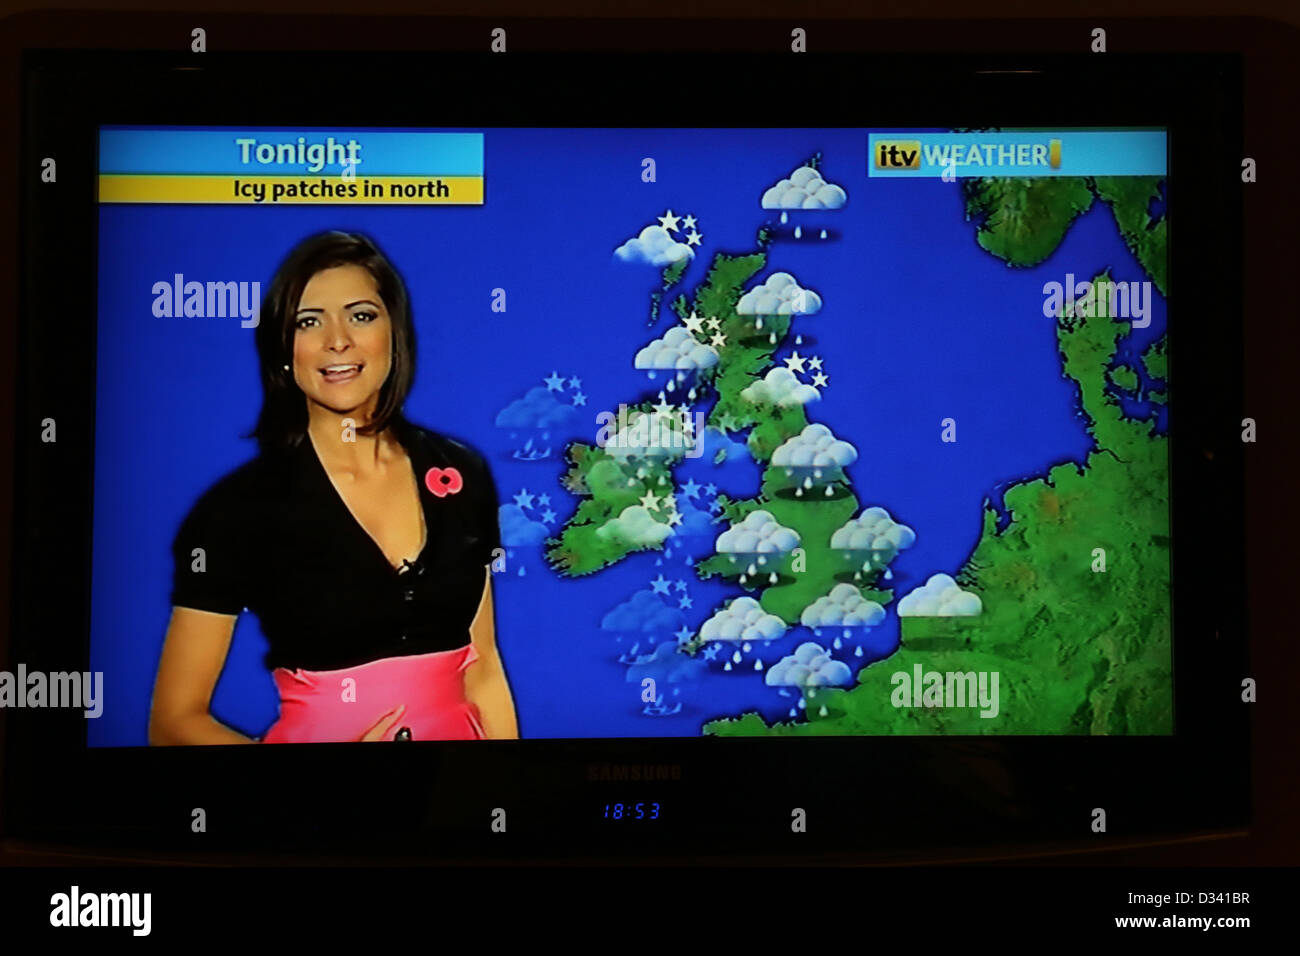 Weather Forecast On Samsung Flat Screen Television Stock Photo